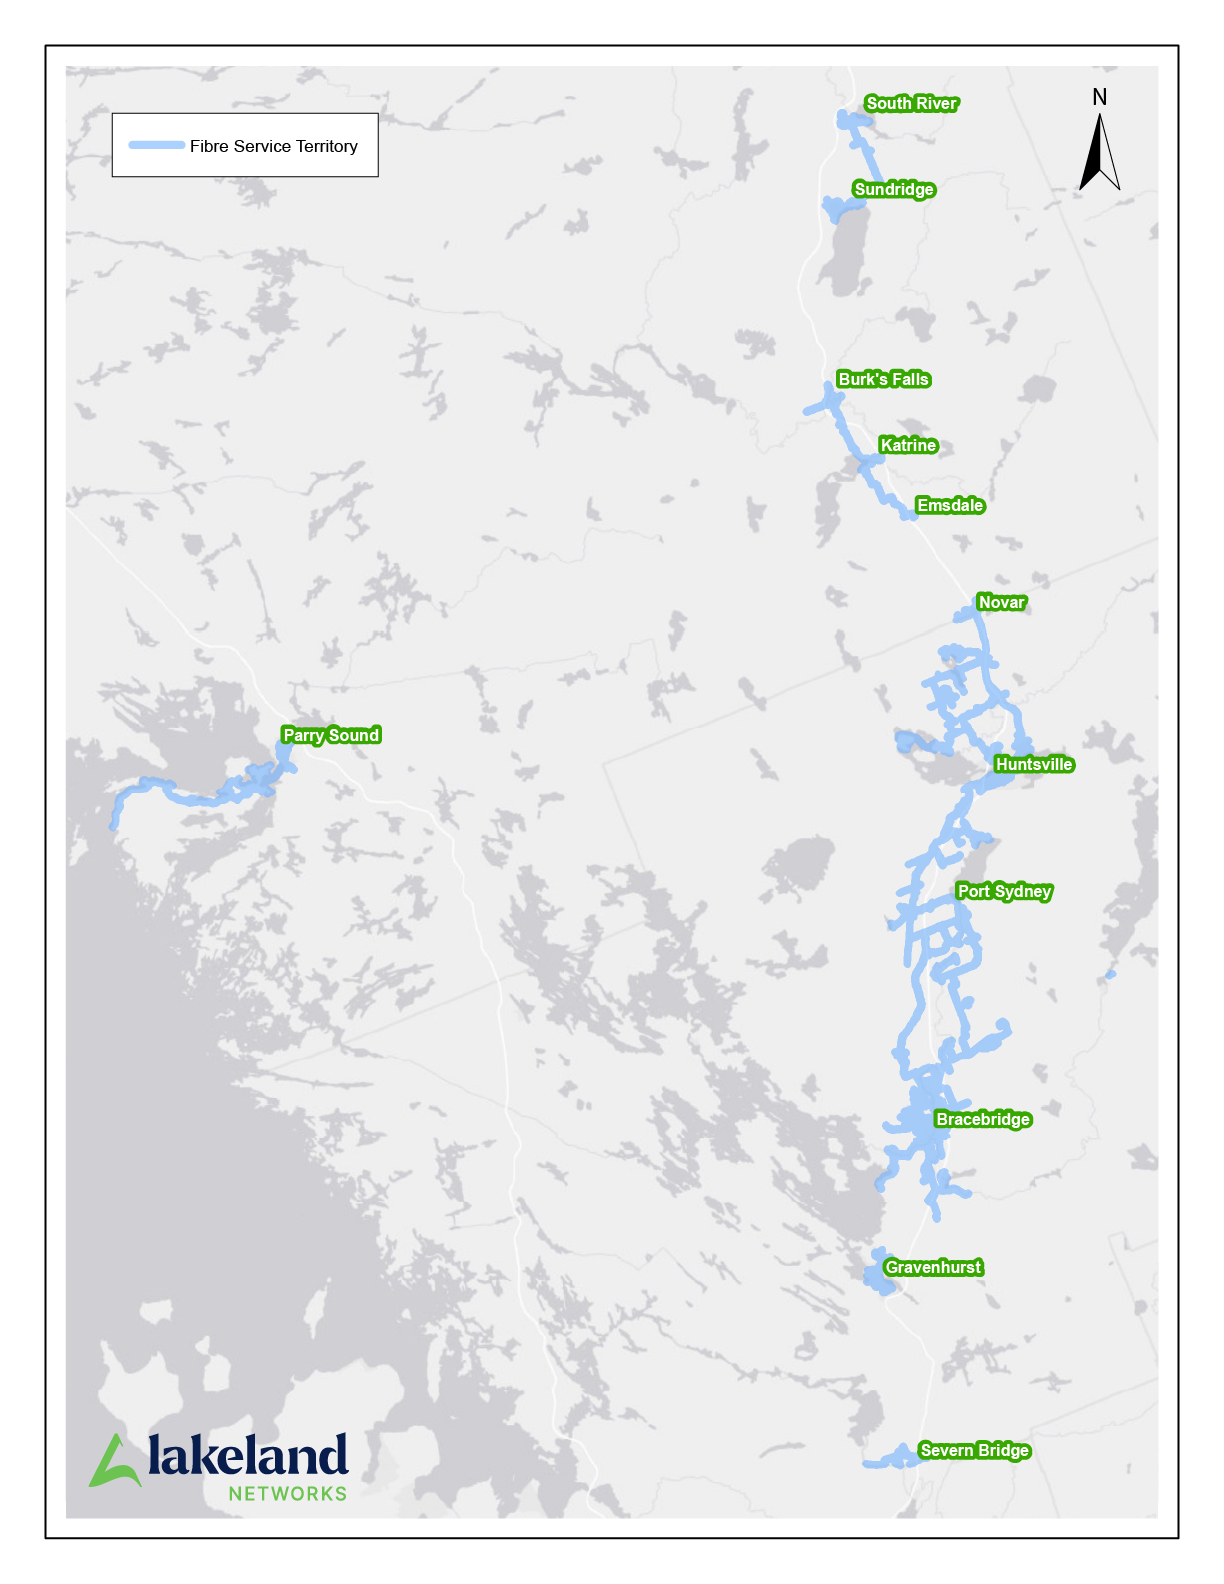 Map showing Lakeland Networks' fibre internet service area in Muskoka, Parry Sound and Almaguin.